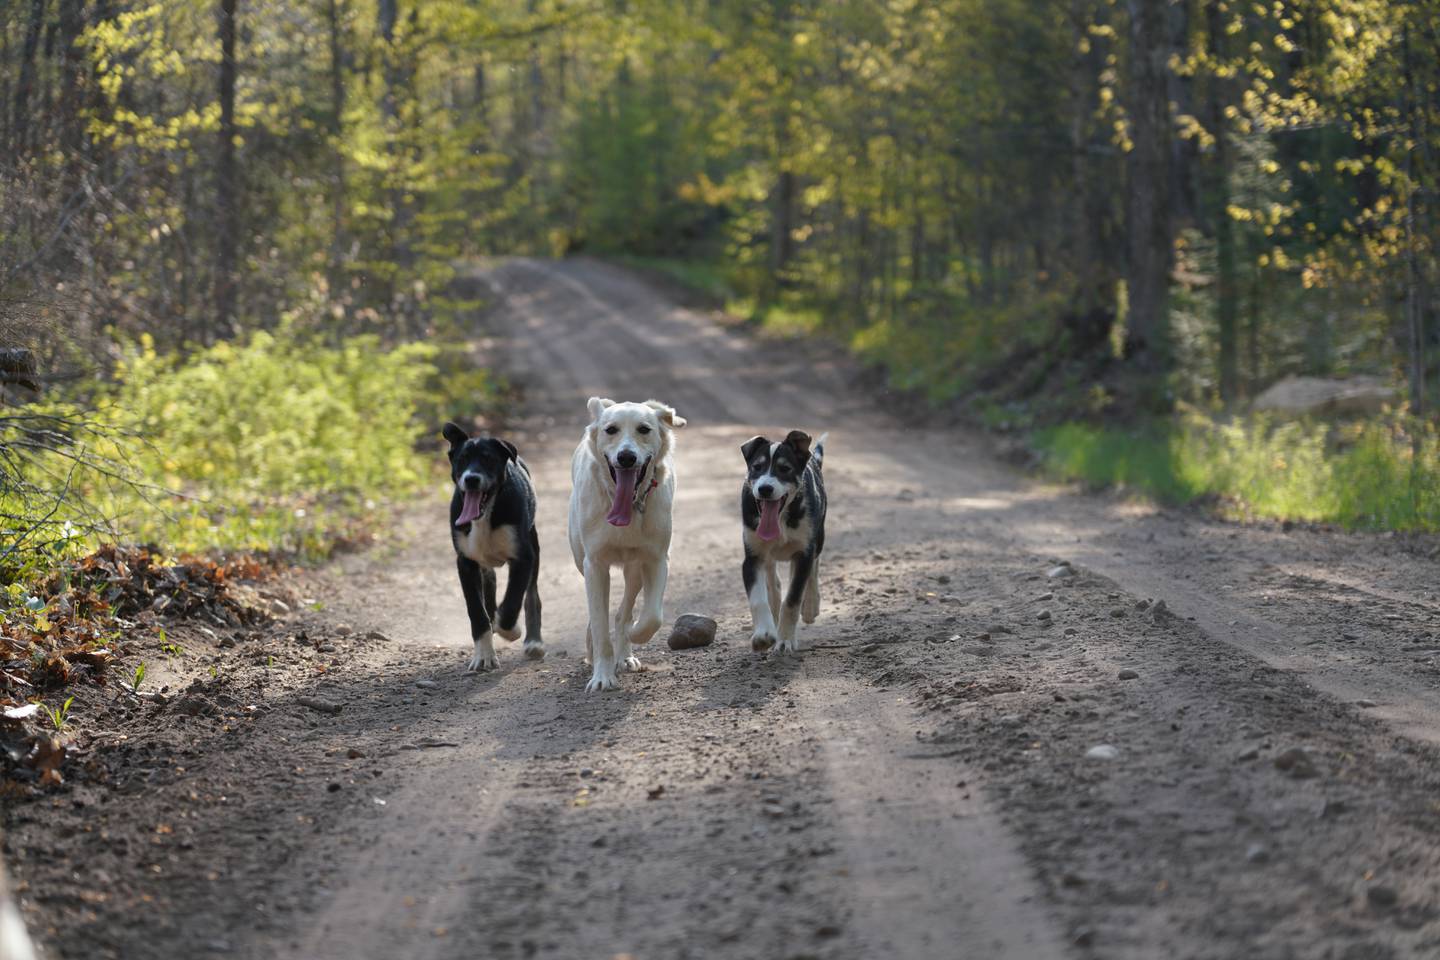 Dogs running in a picture from the book “Dogs on the Trail: A Year in the Life” by Blair Braverman and Quince Mountain